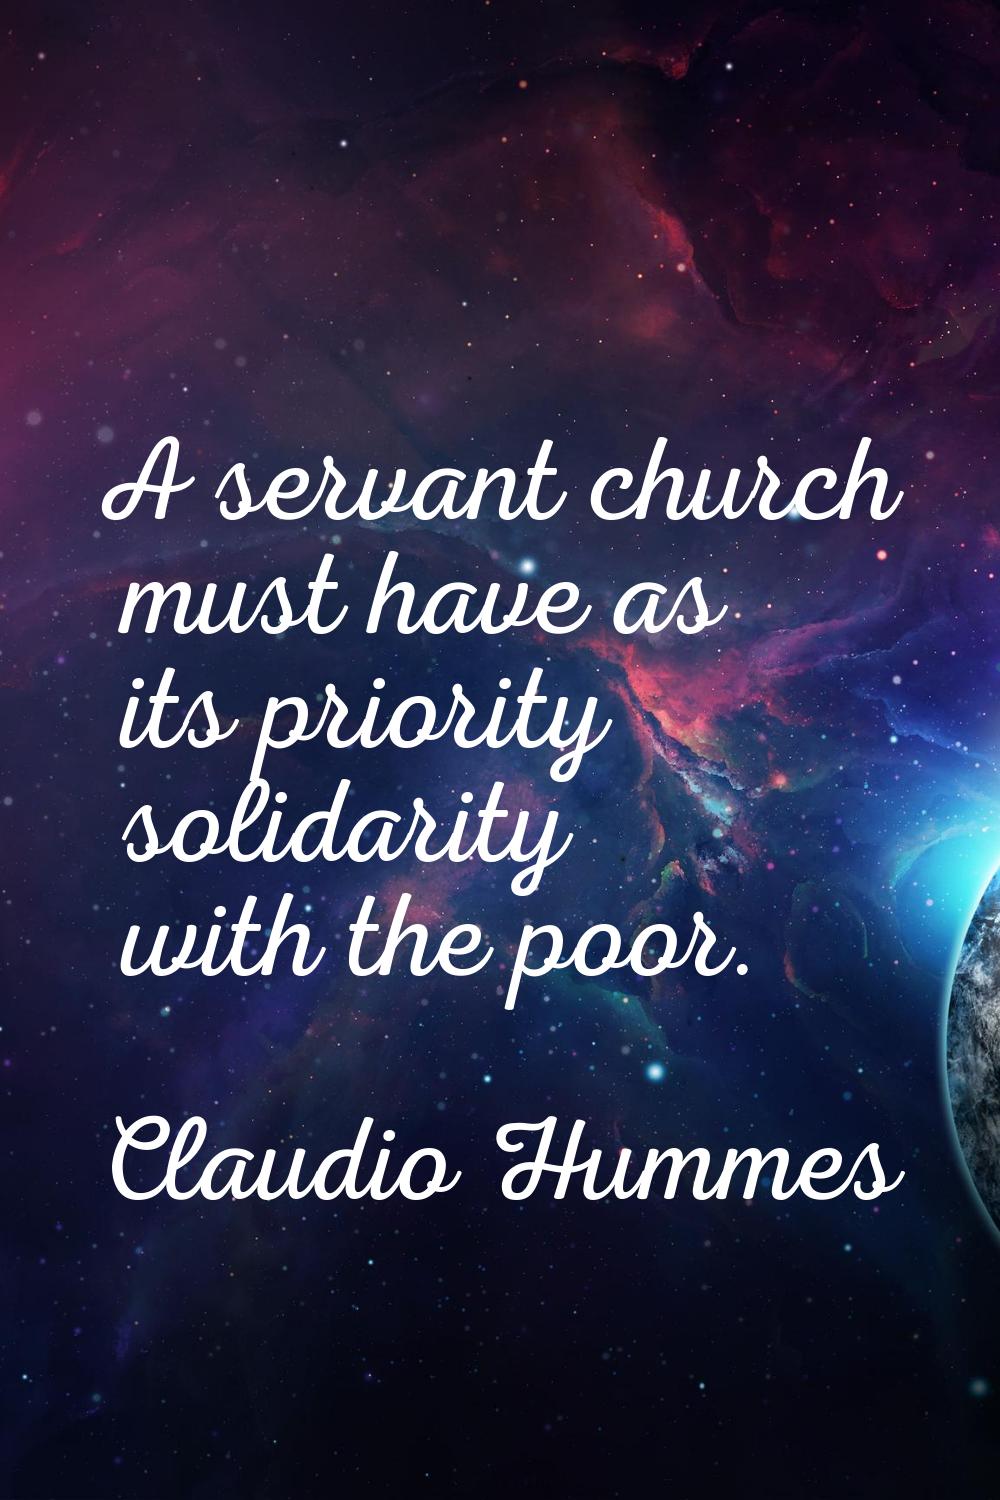 A servant church must have as its priority solidarity with the poor.